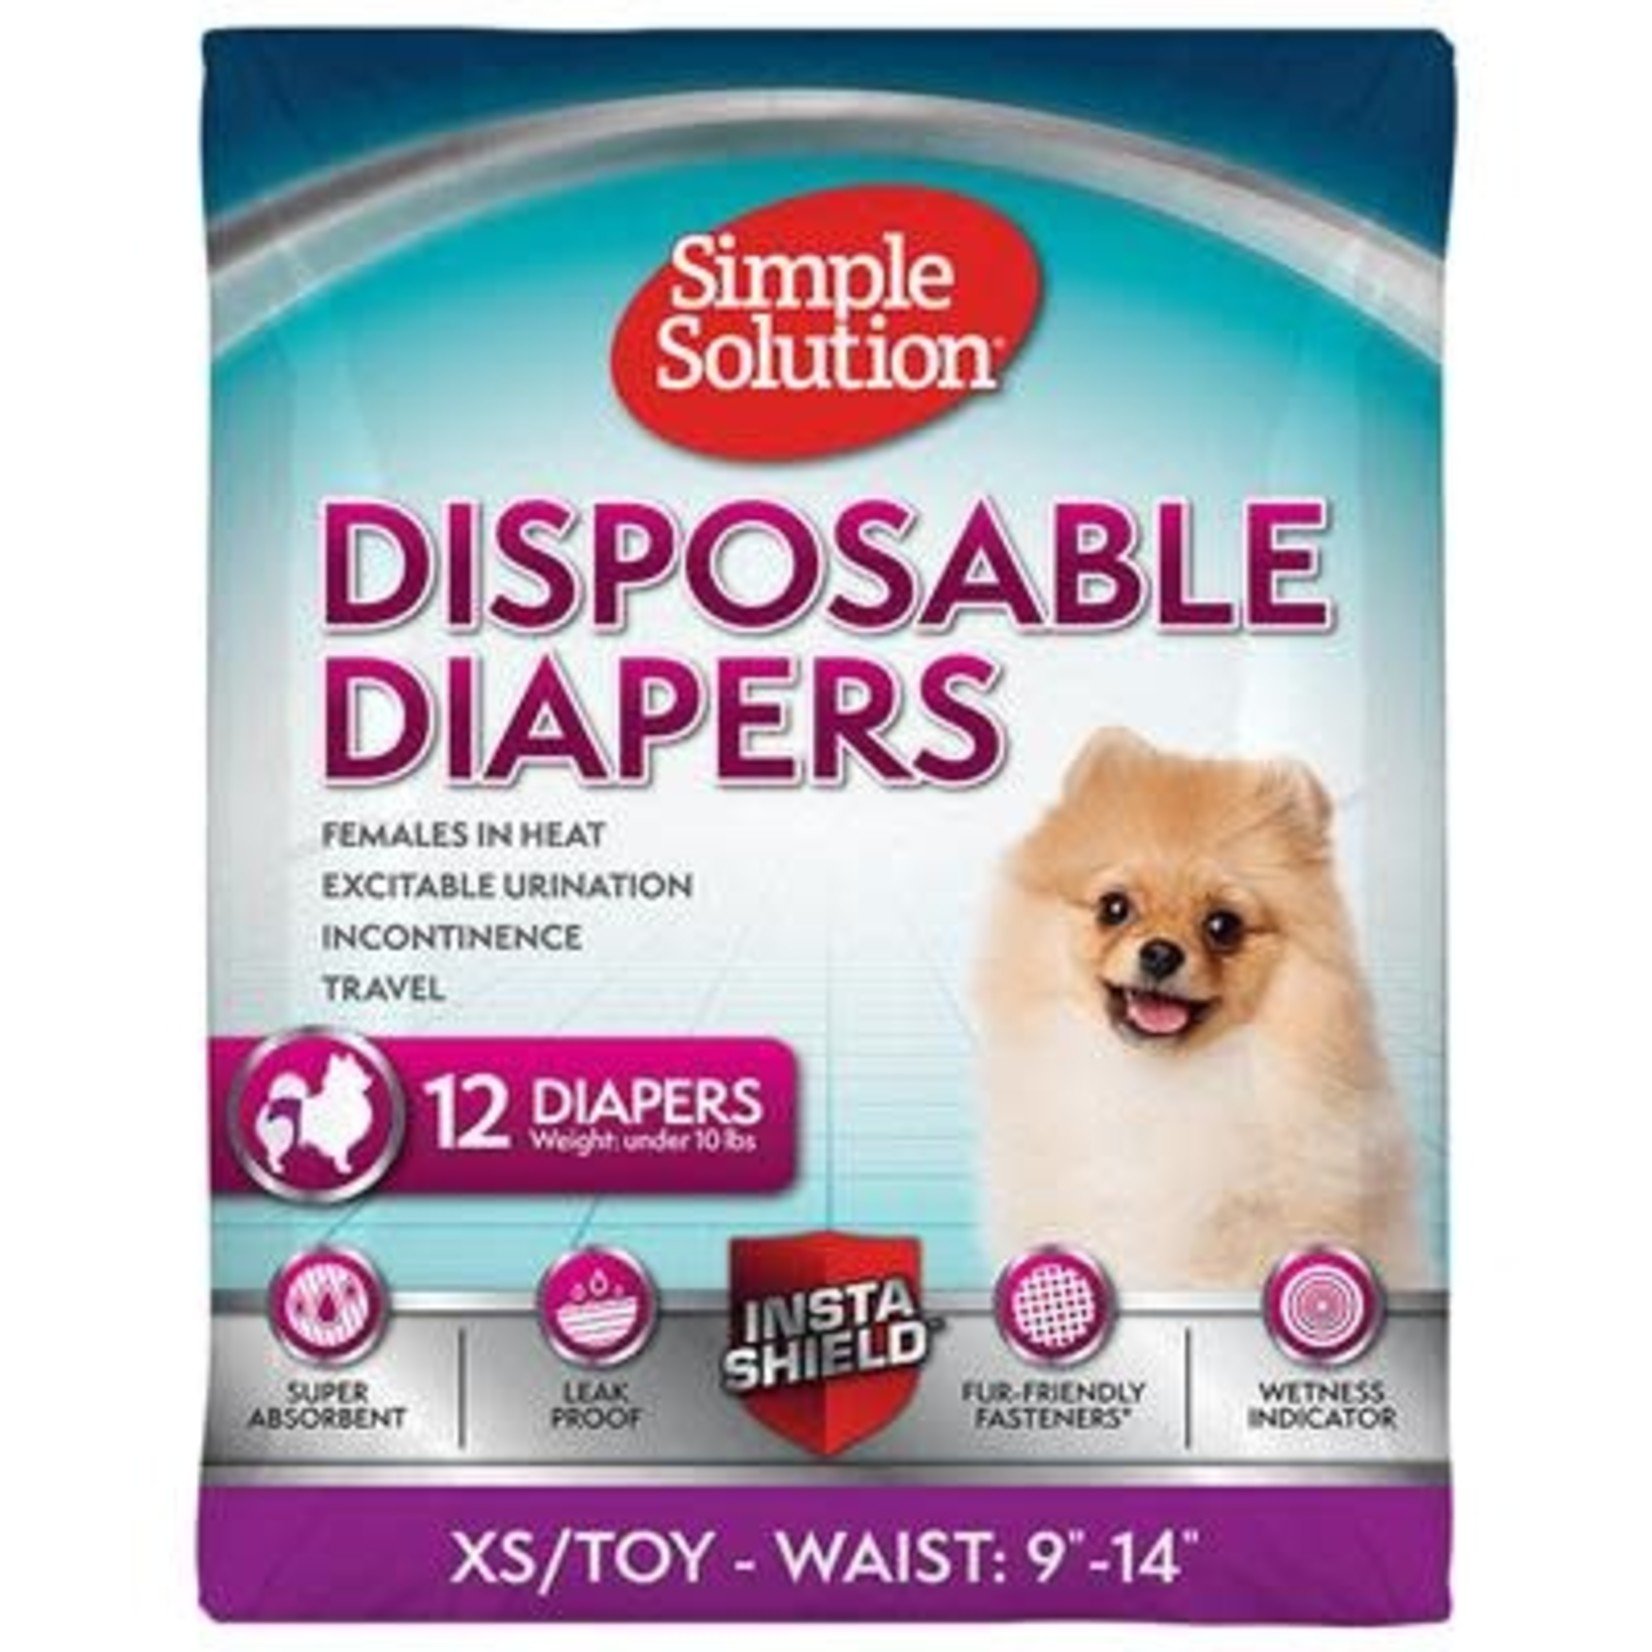 Disposable Female Diapers 12pk